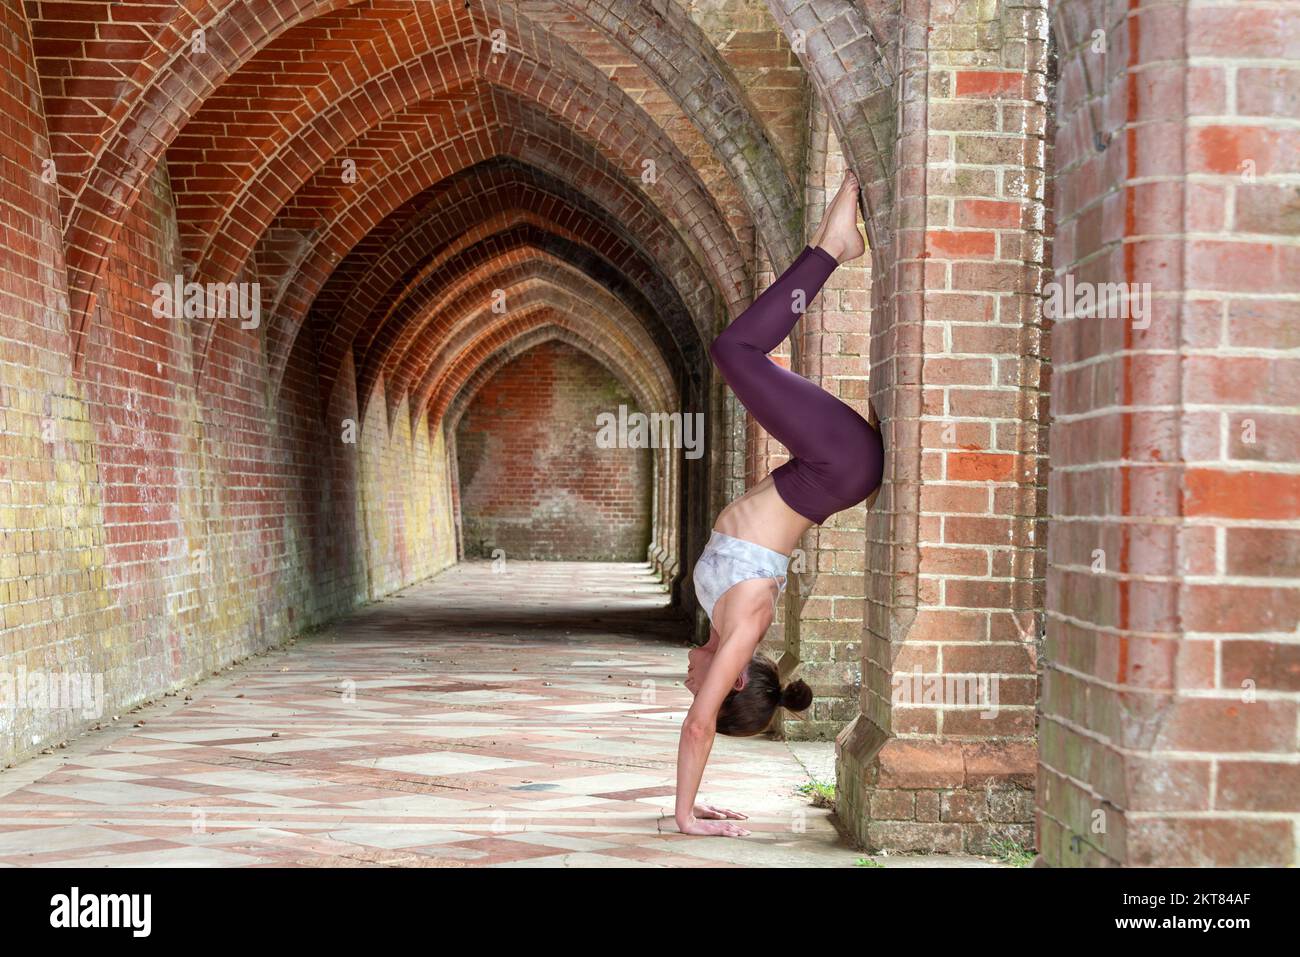 Sporty woman doing a handstand against a brick arch. Fitness concept. Stock Photo